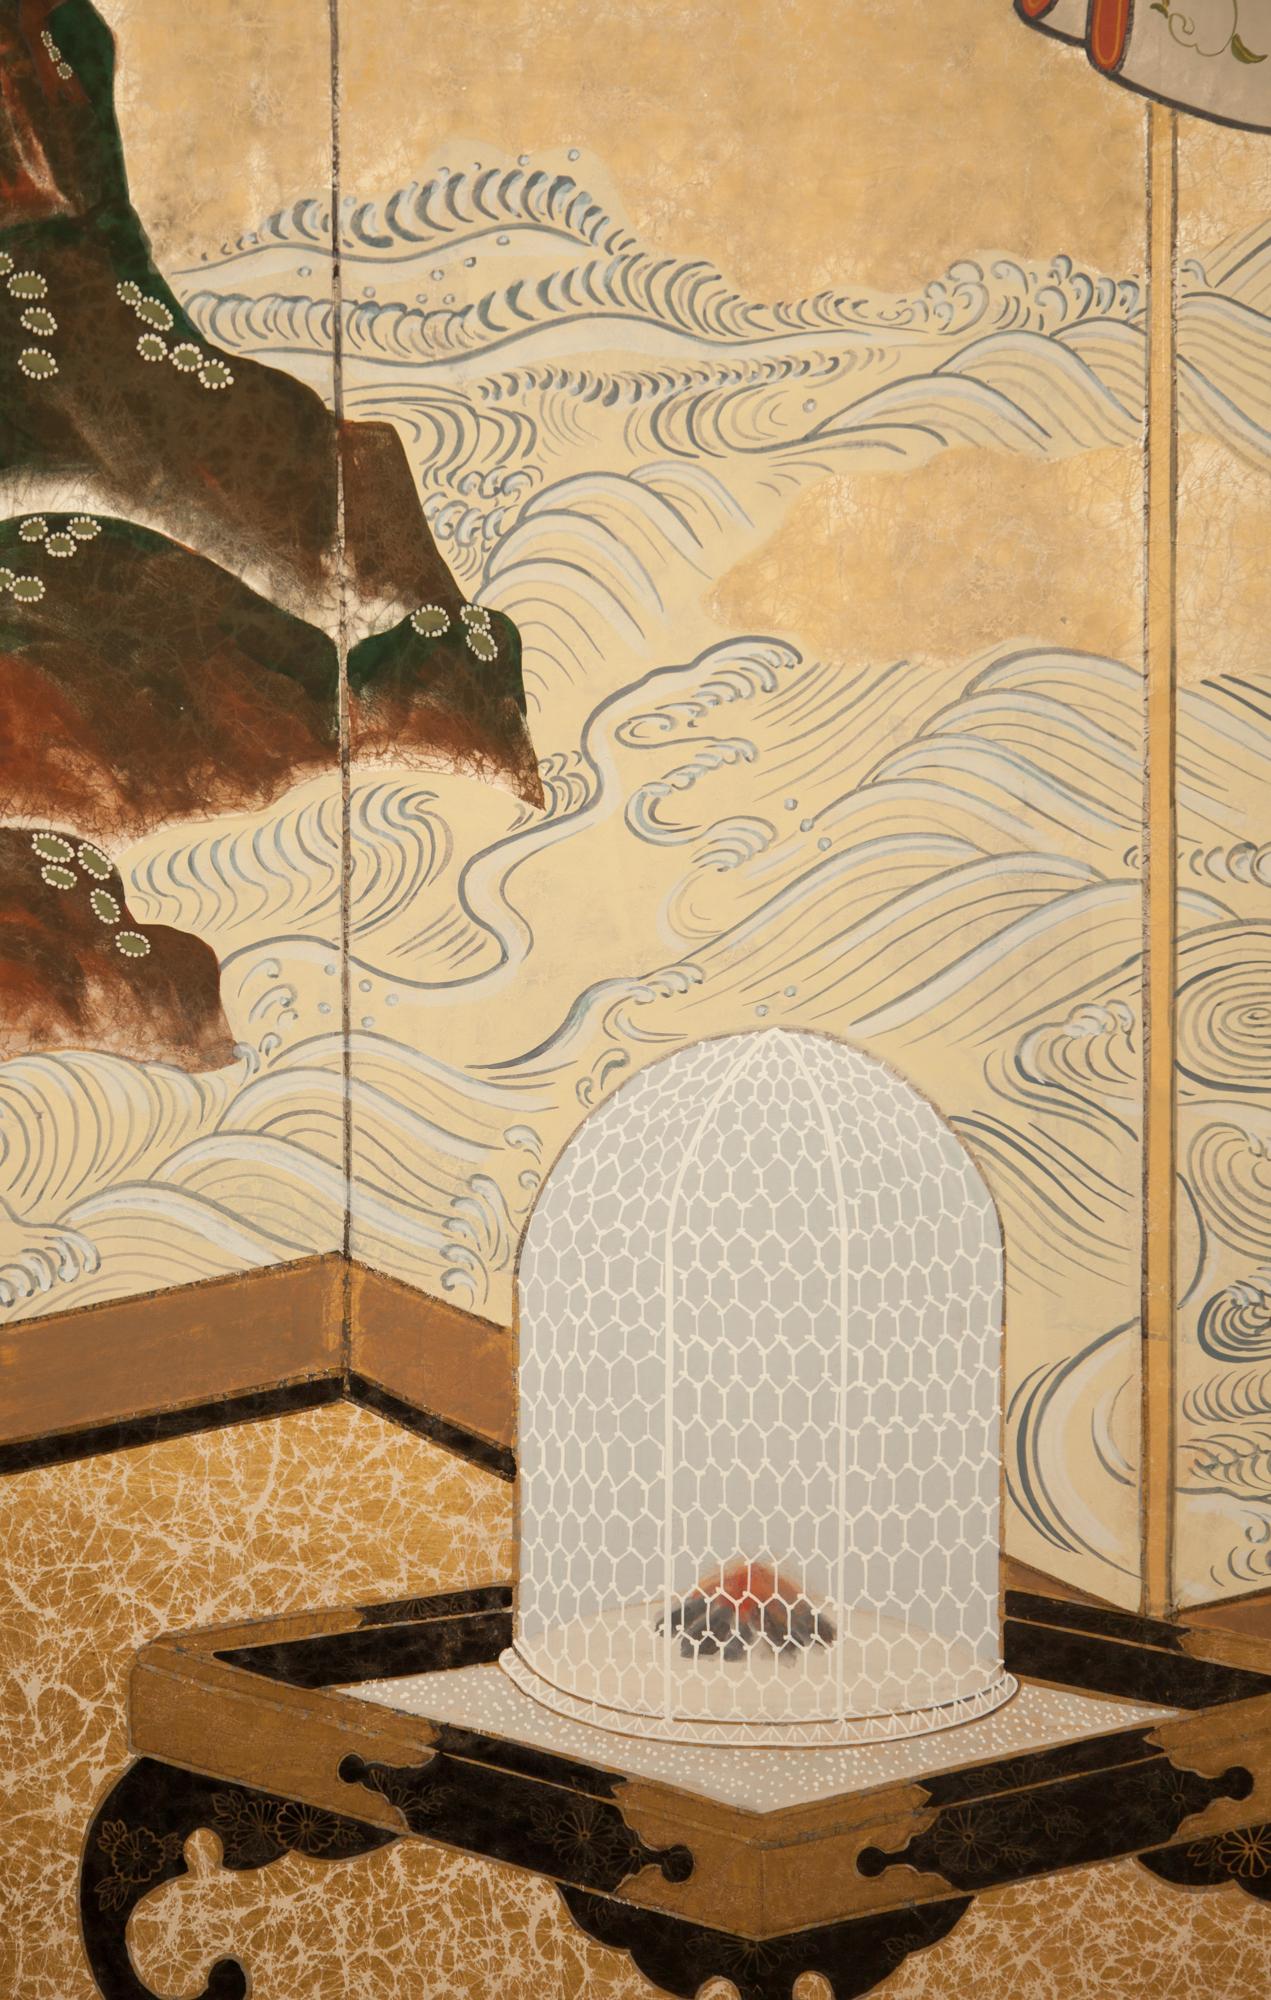 Kano School painting depicting an interior with finery such as a lacquer table, silk textiles, and other paintings. The fusuma doors appear to be a famous Sesshu Toyo painting, and the free-standing, folded 